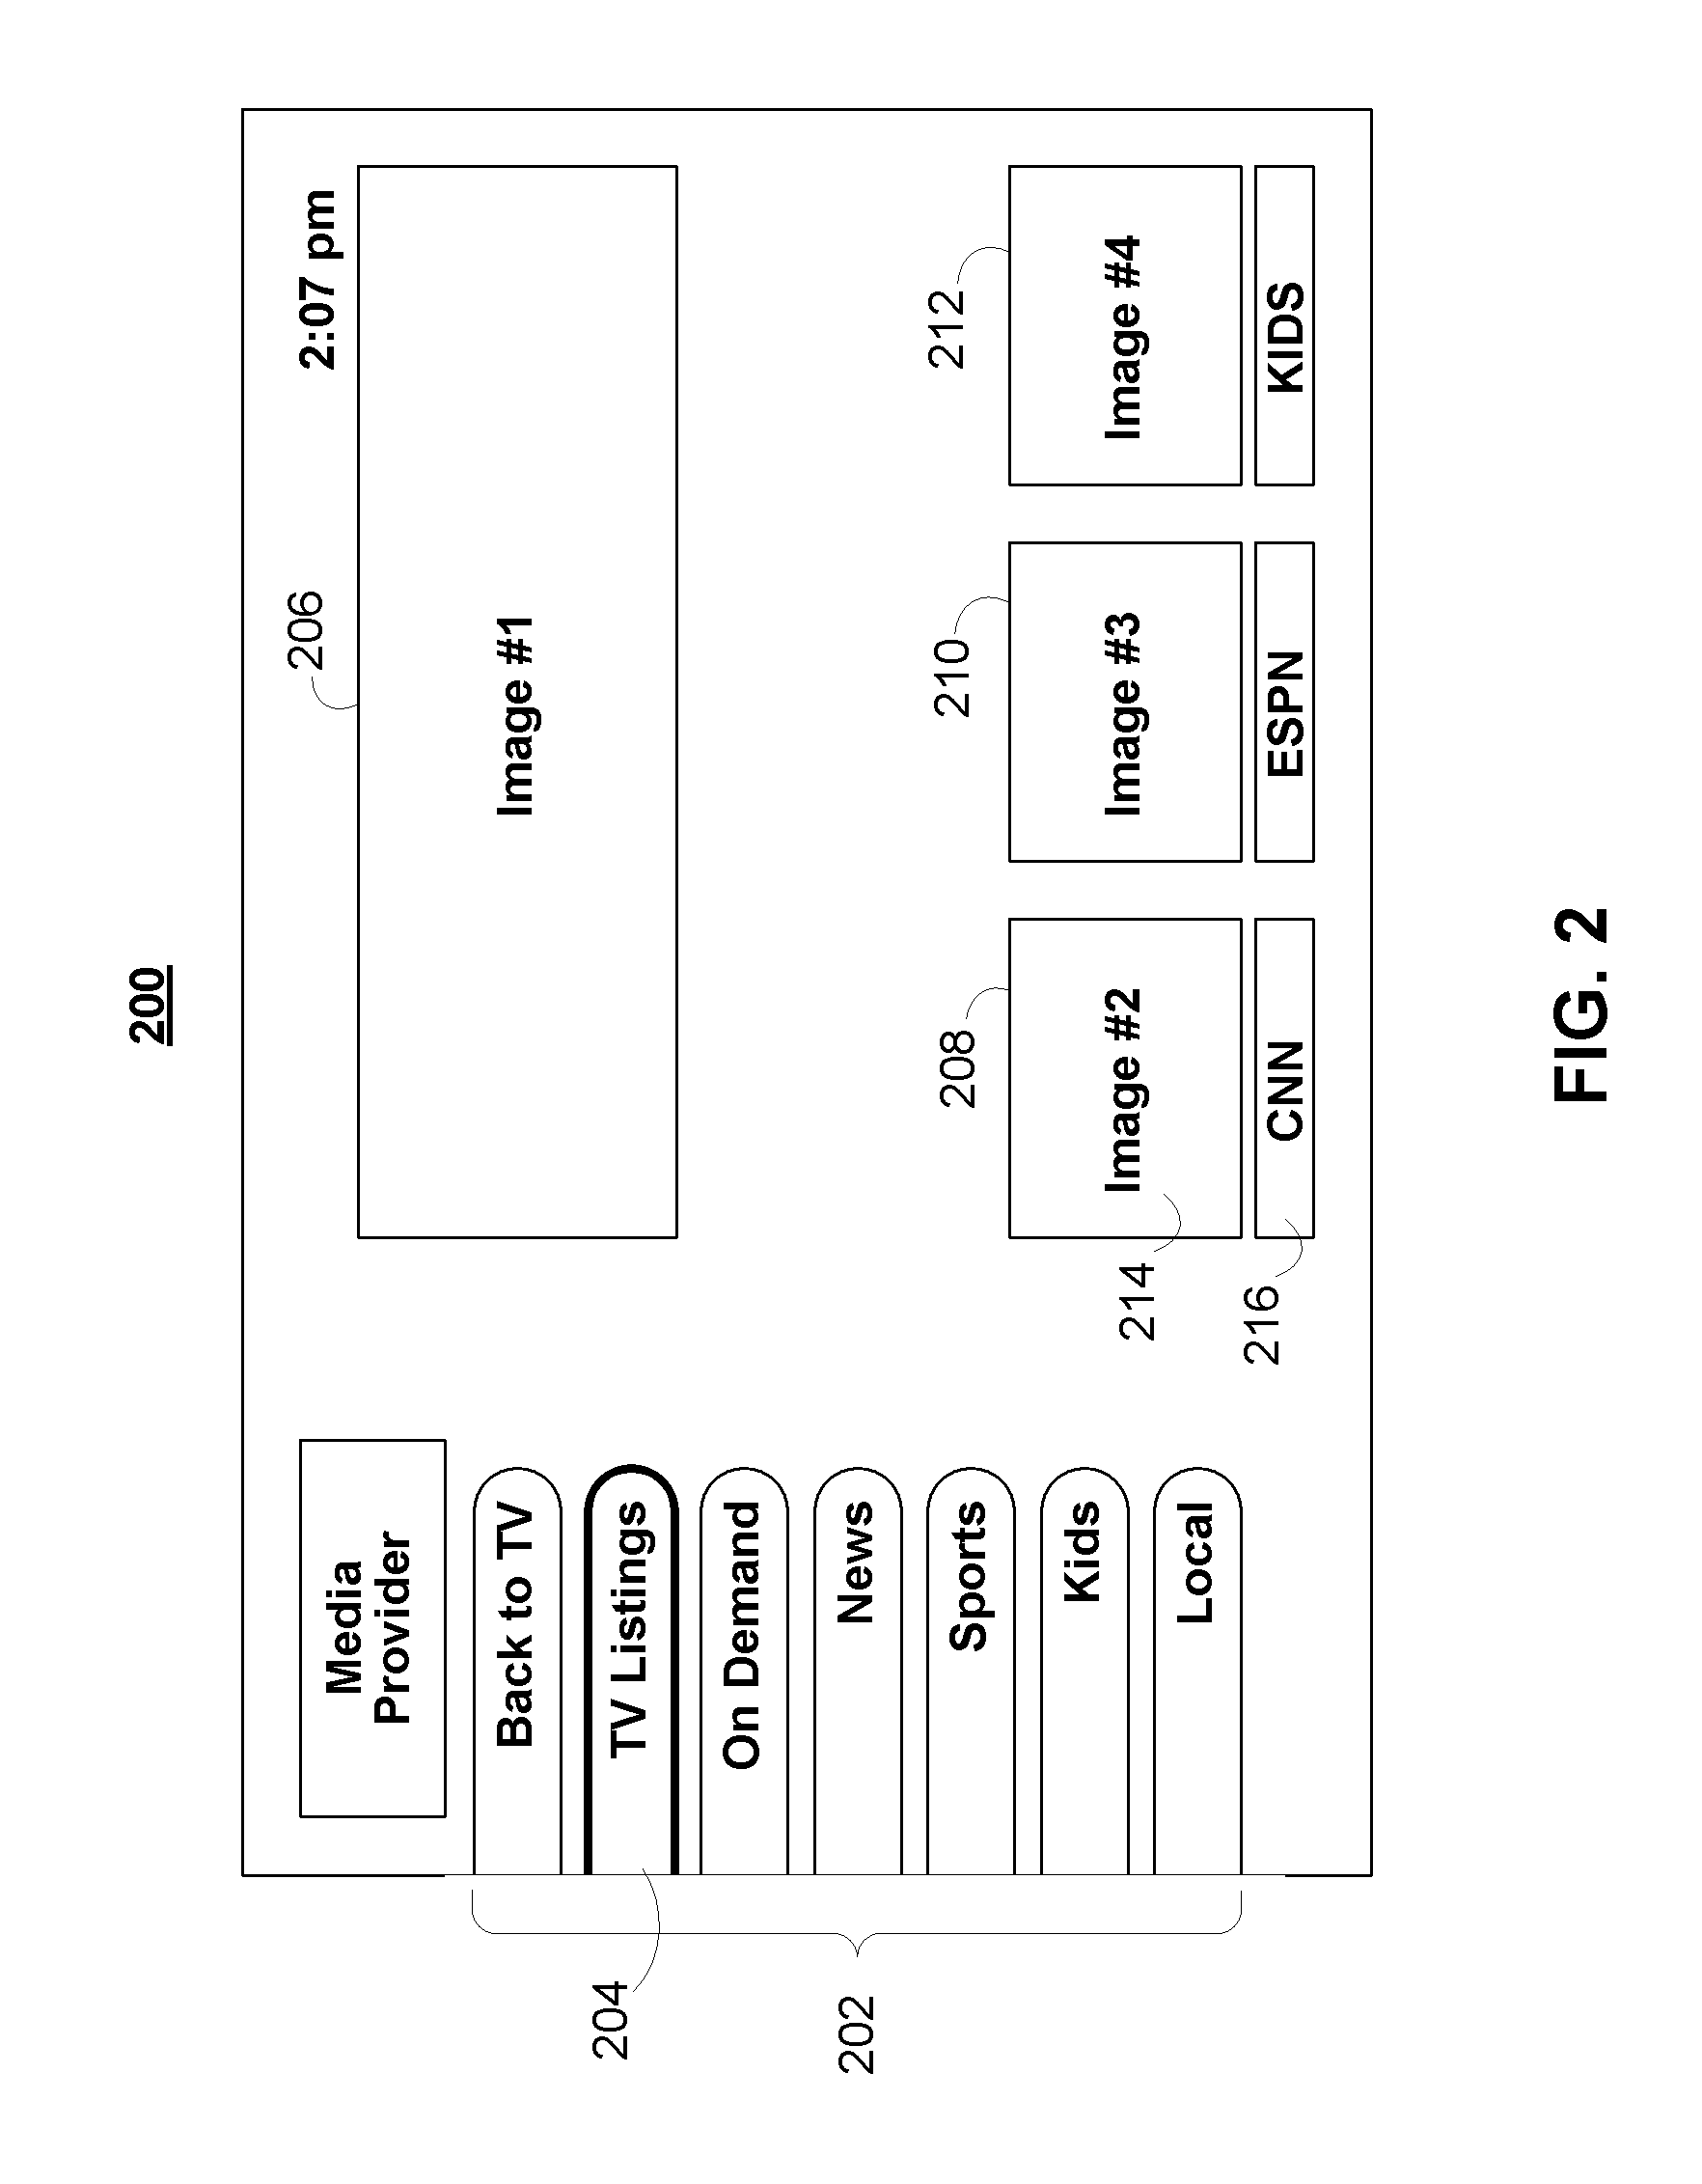 Systems and methods for handling profiles in a community